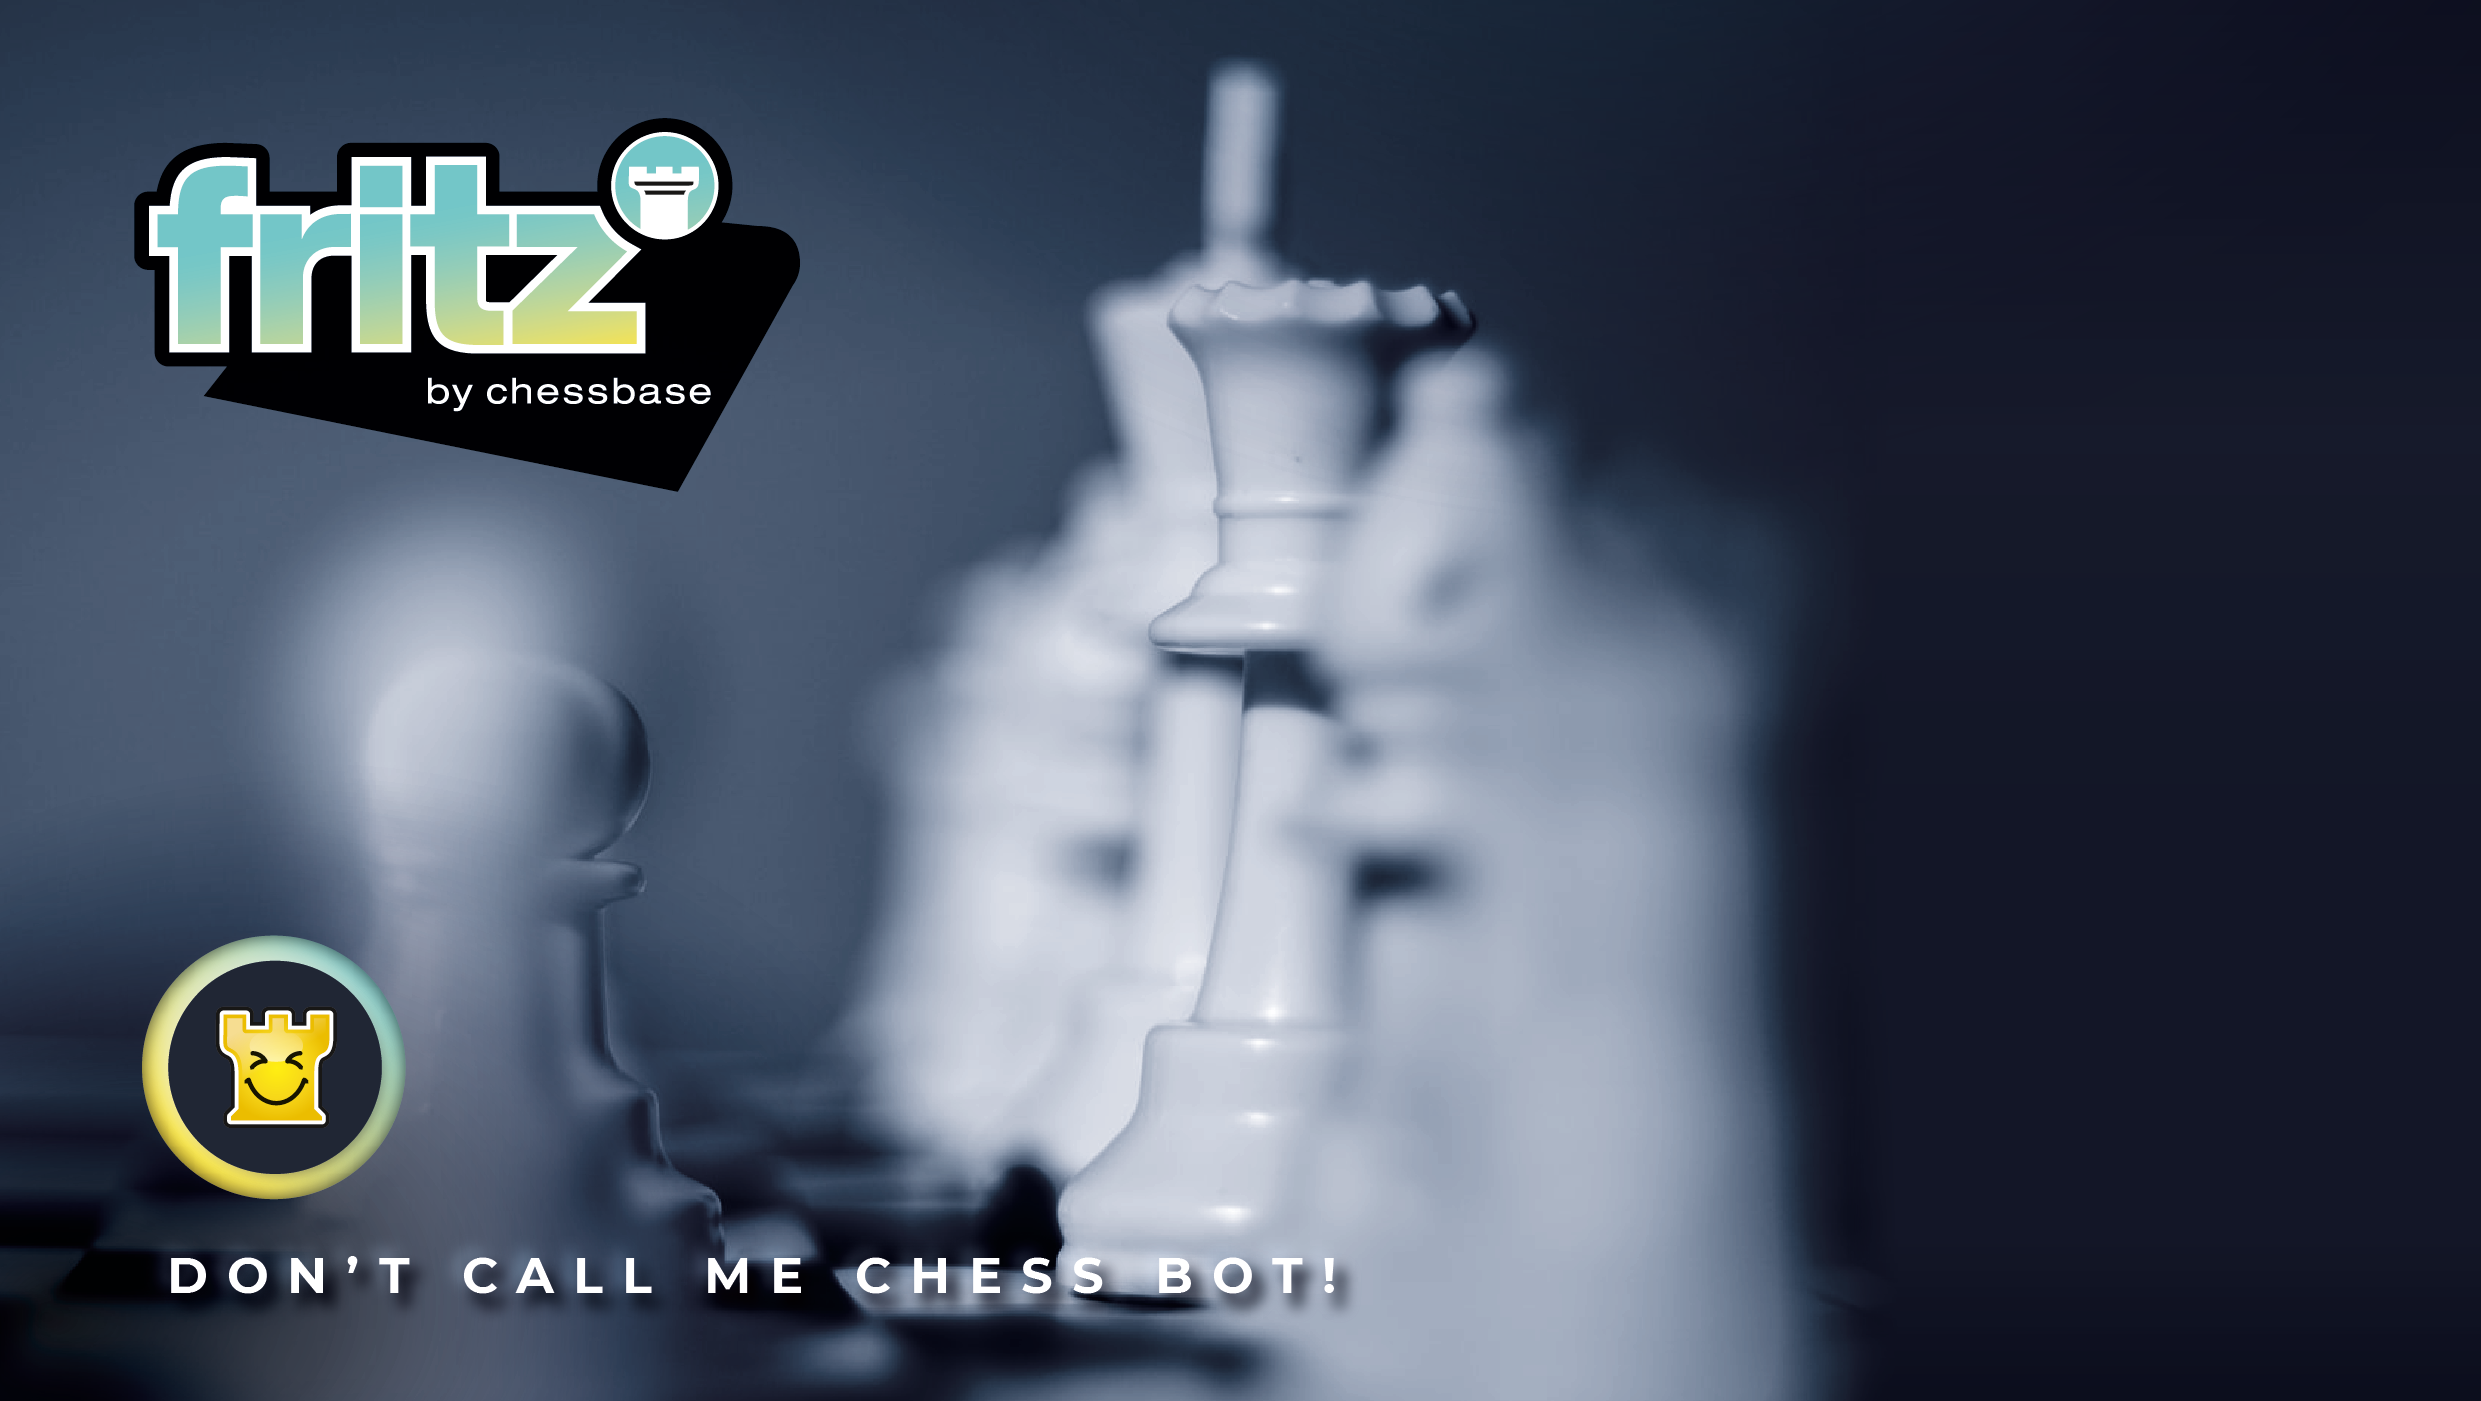 Fritz comes to Xbox - just Don't Call Me a Chess Bot!